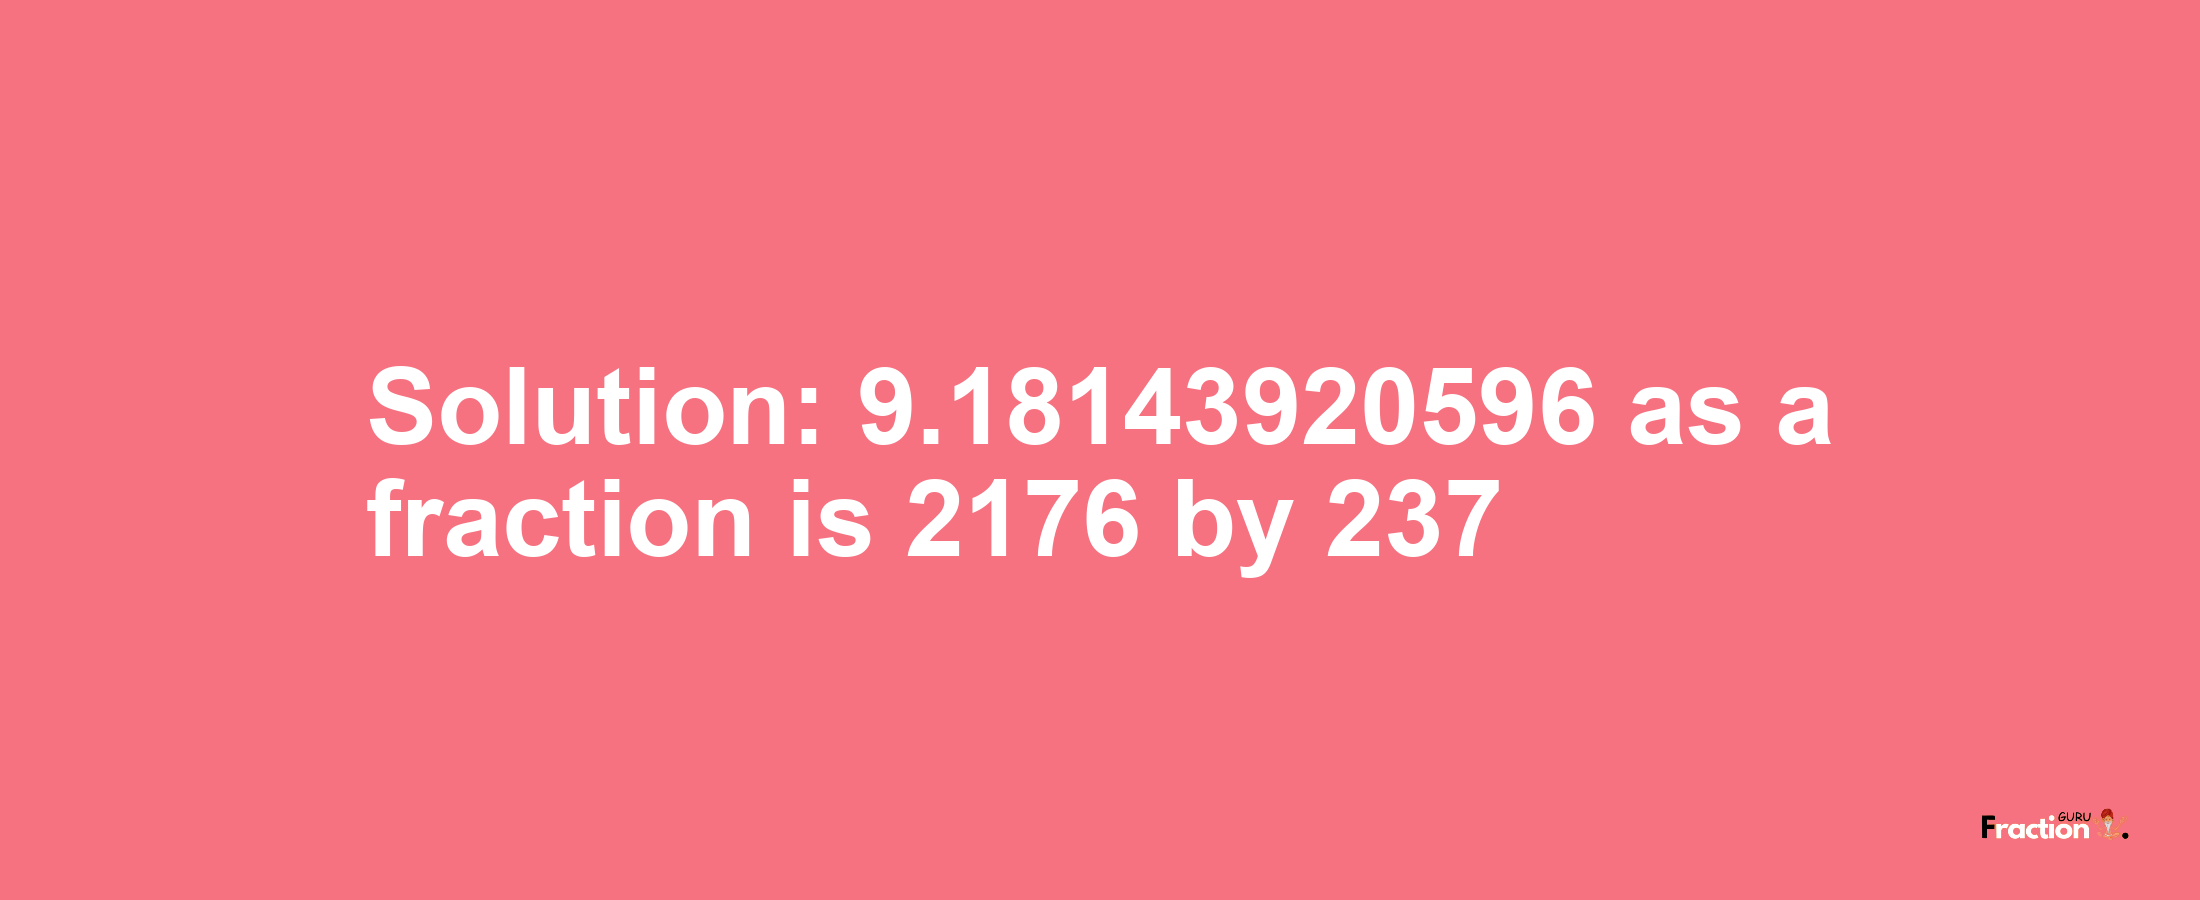 Solution:9.18143920596 as a fraction is 2176/237